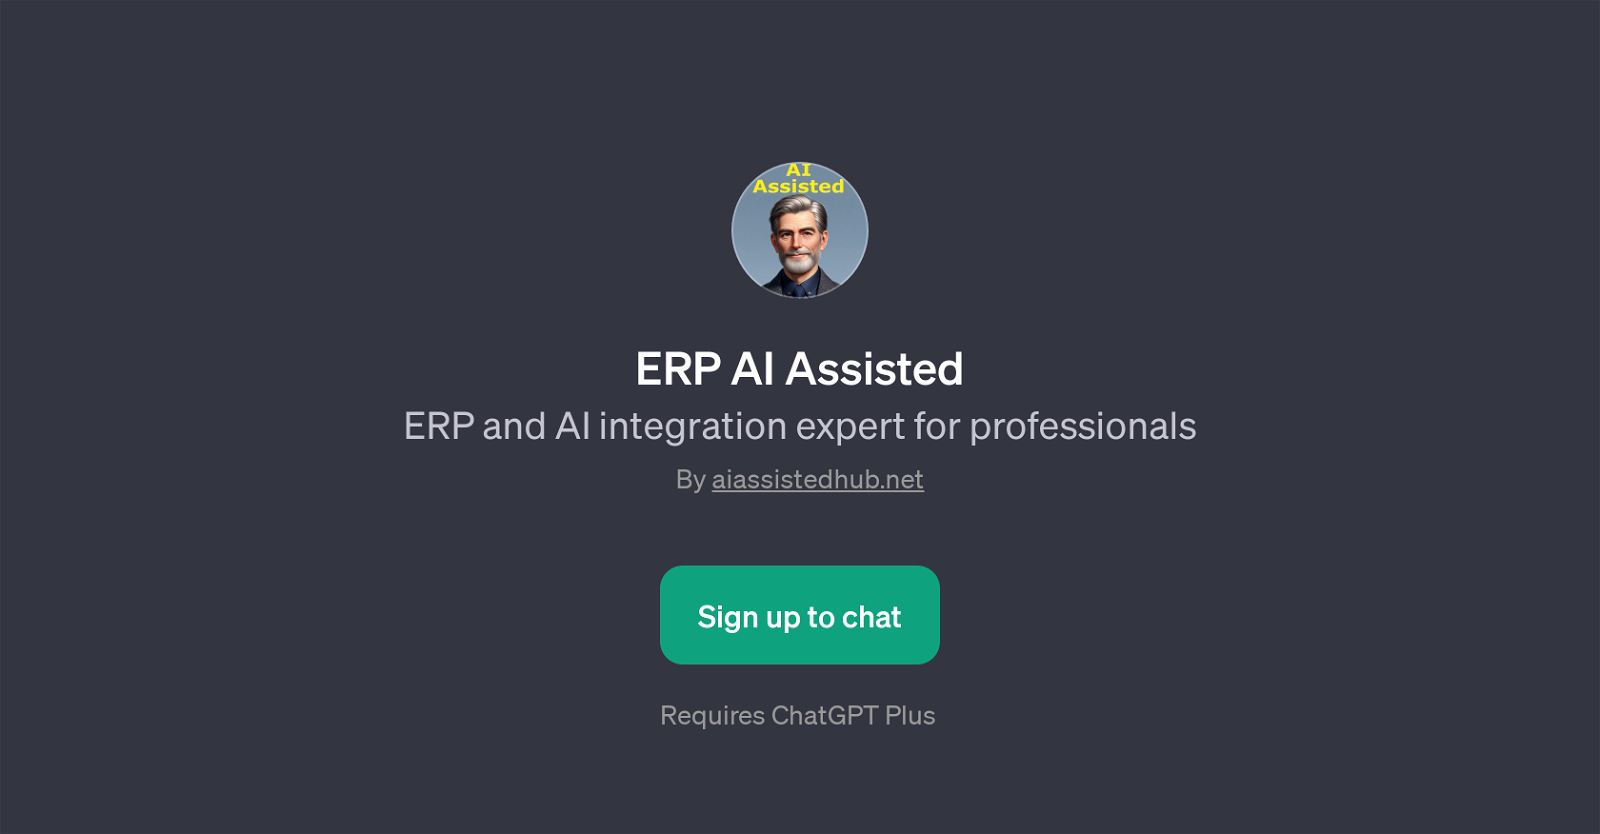 ERP AI Assisted website